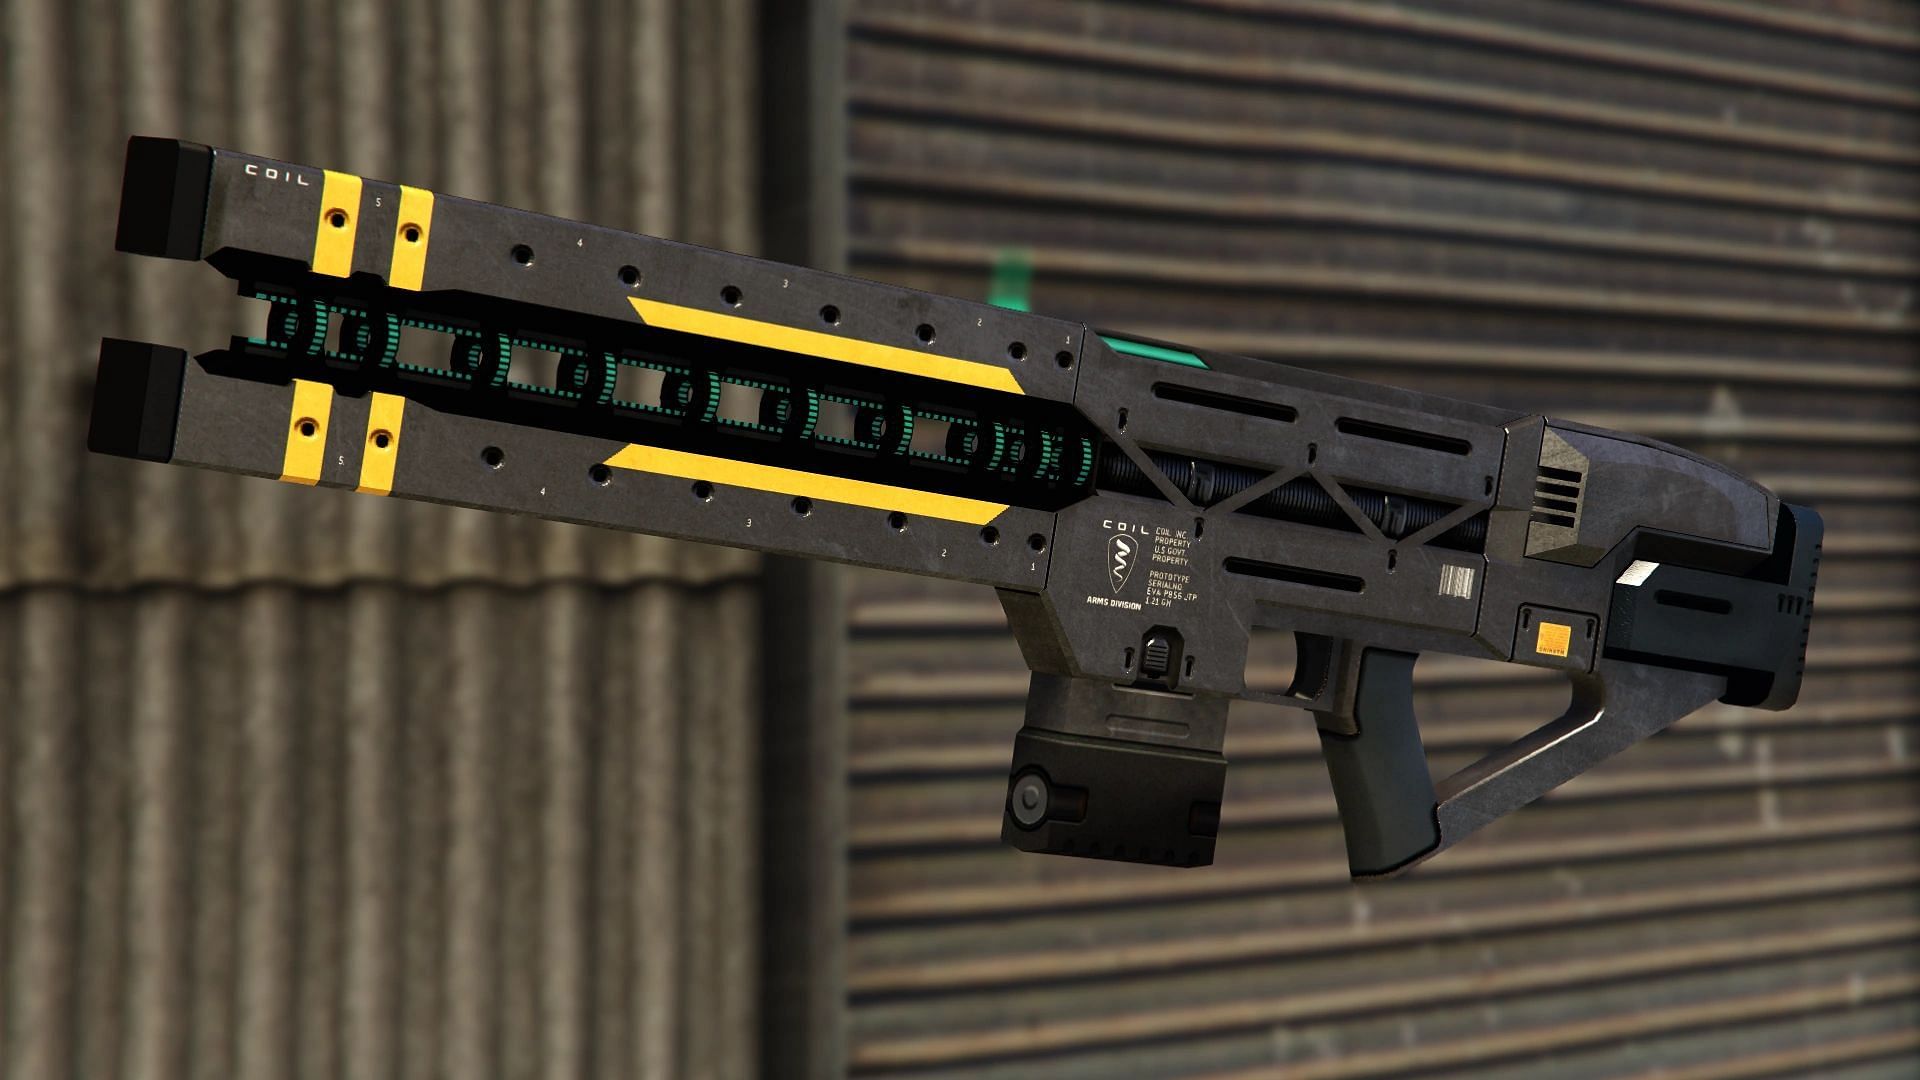 GTA Online might soon get the mighty Railgun, through drip feed content early next year. (Image via Rockstar Games)